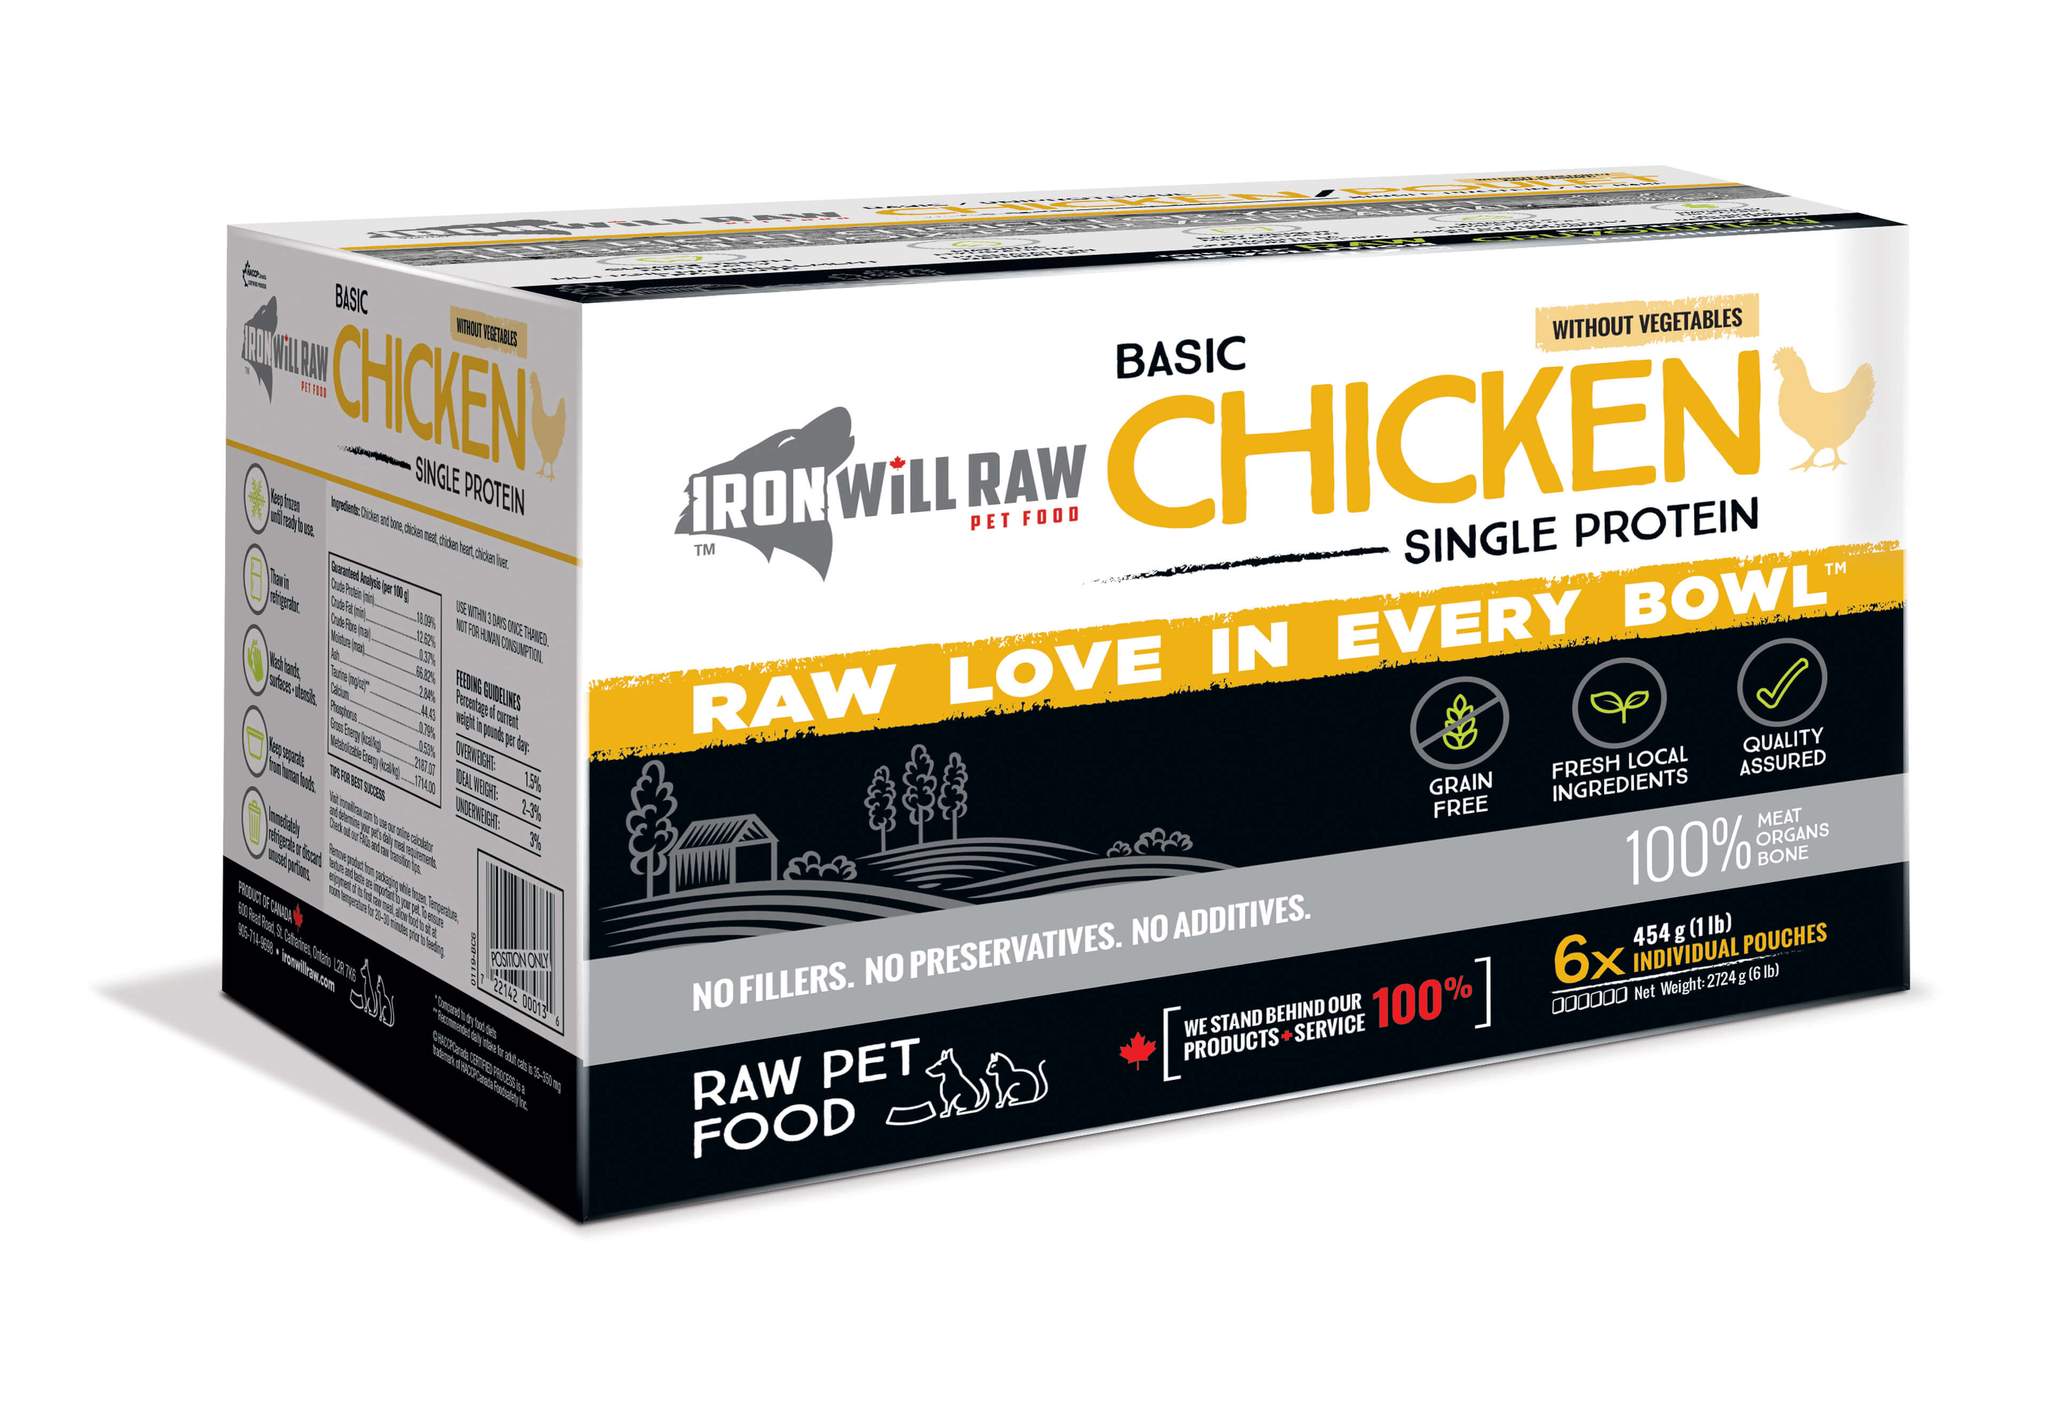 IronWillRaw with Basic Chicken